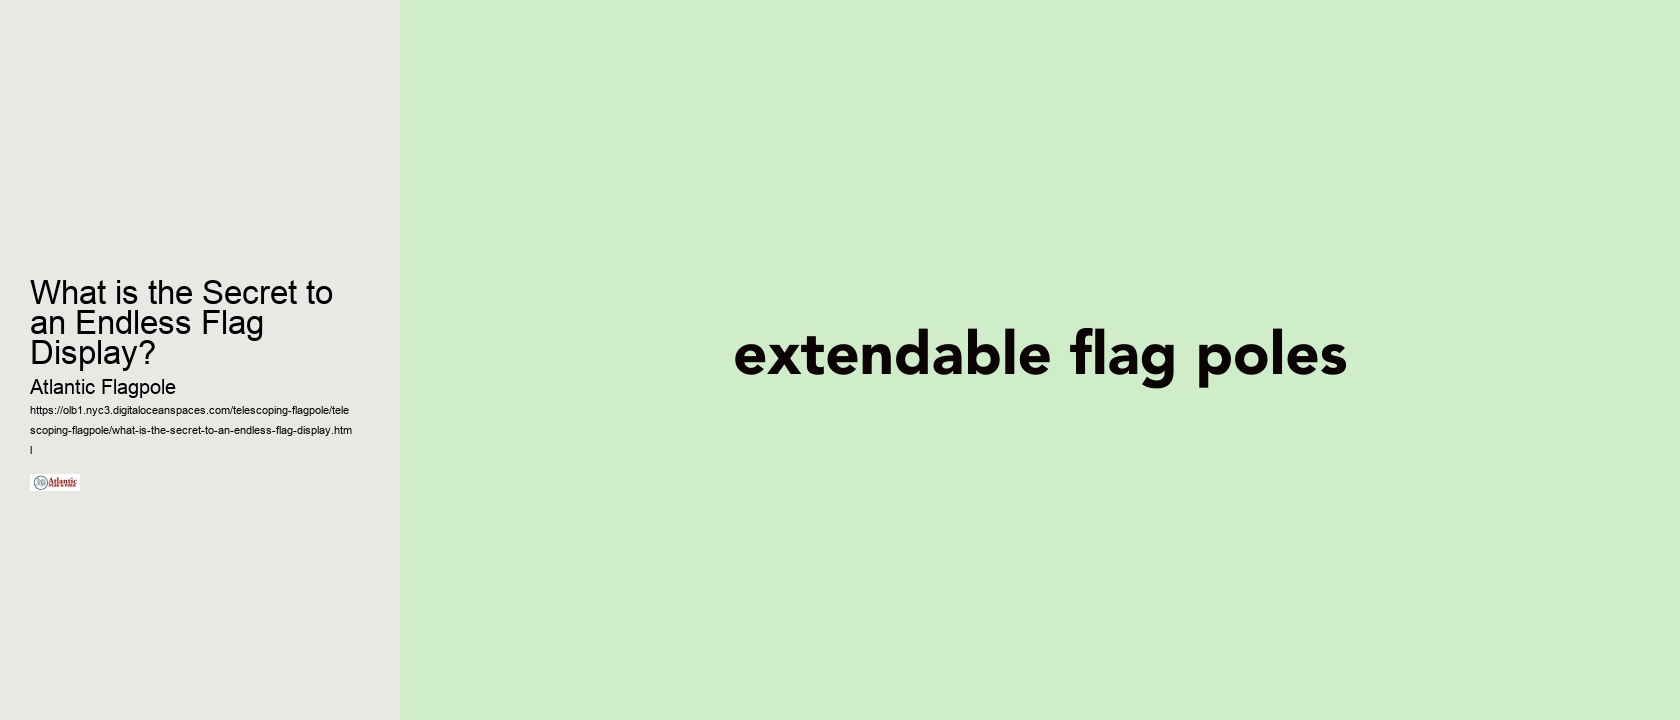 What is the Secret to an Endless Flag Display?